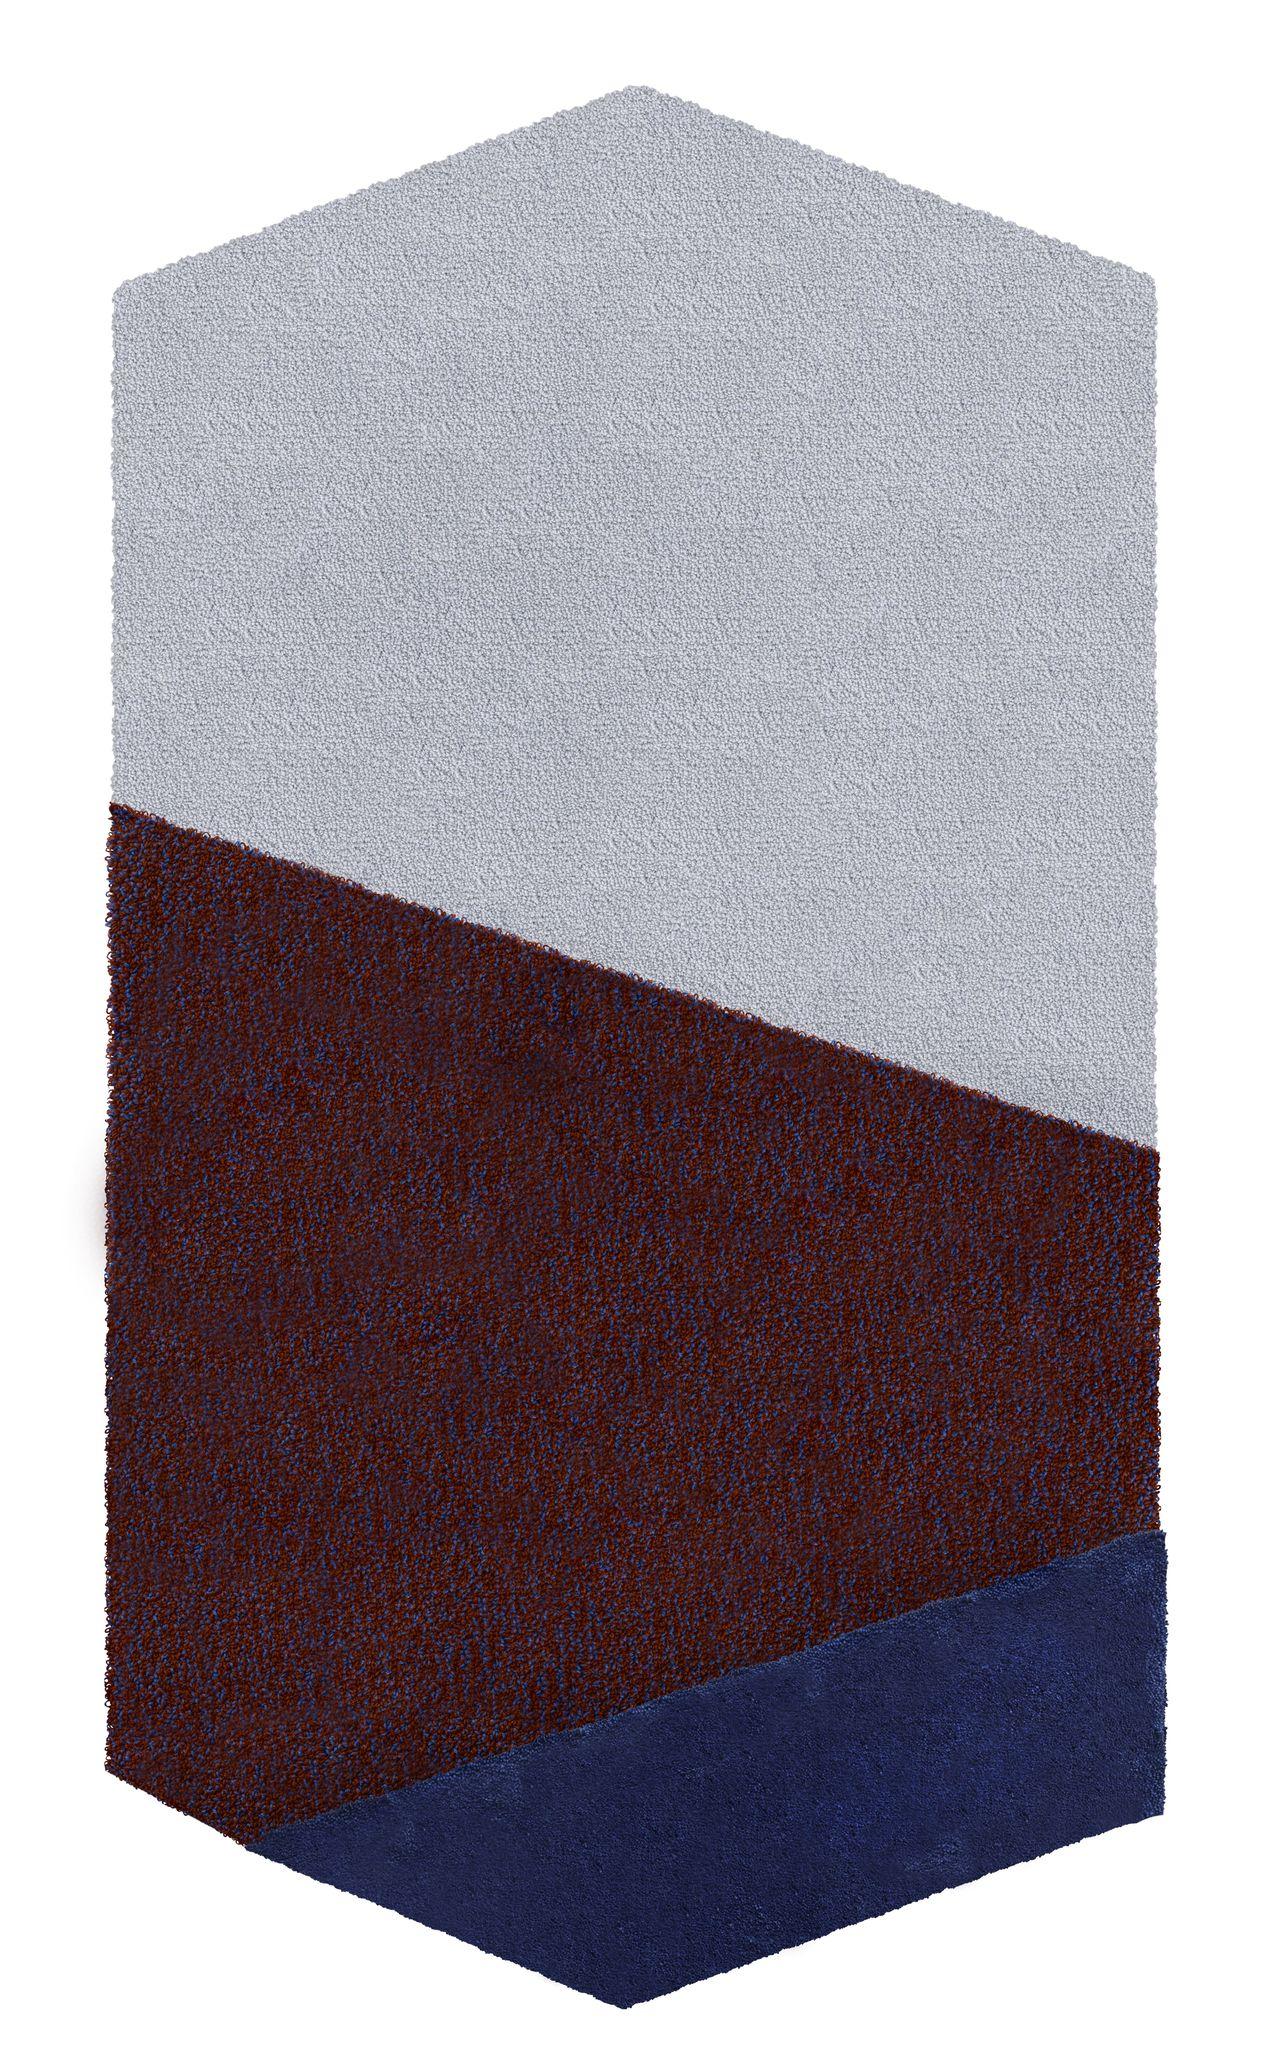 Italian Oci Triptych M, Composition of 3 Rugs 100% Wool /Blue and Brick by Portego For Sale